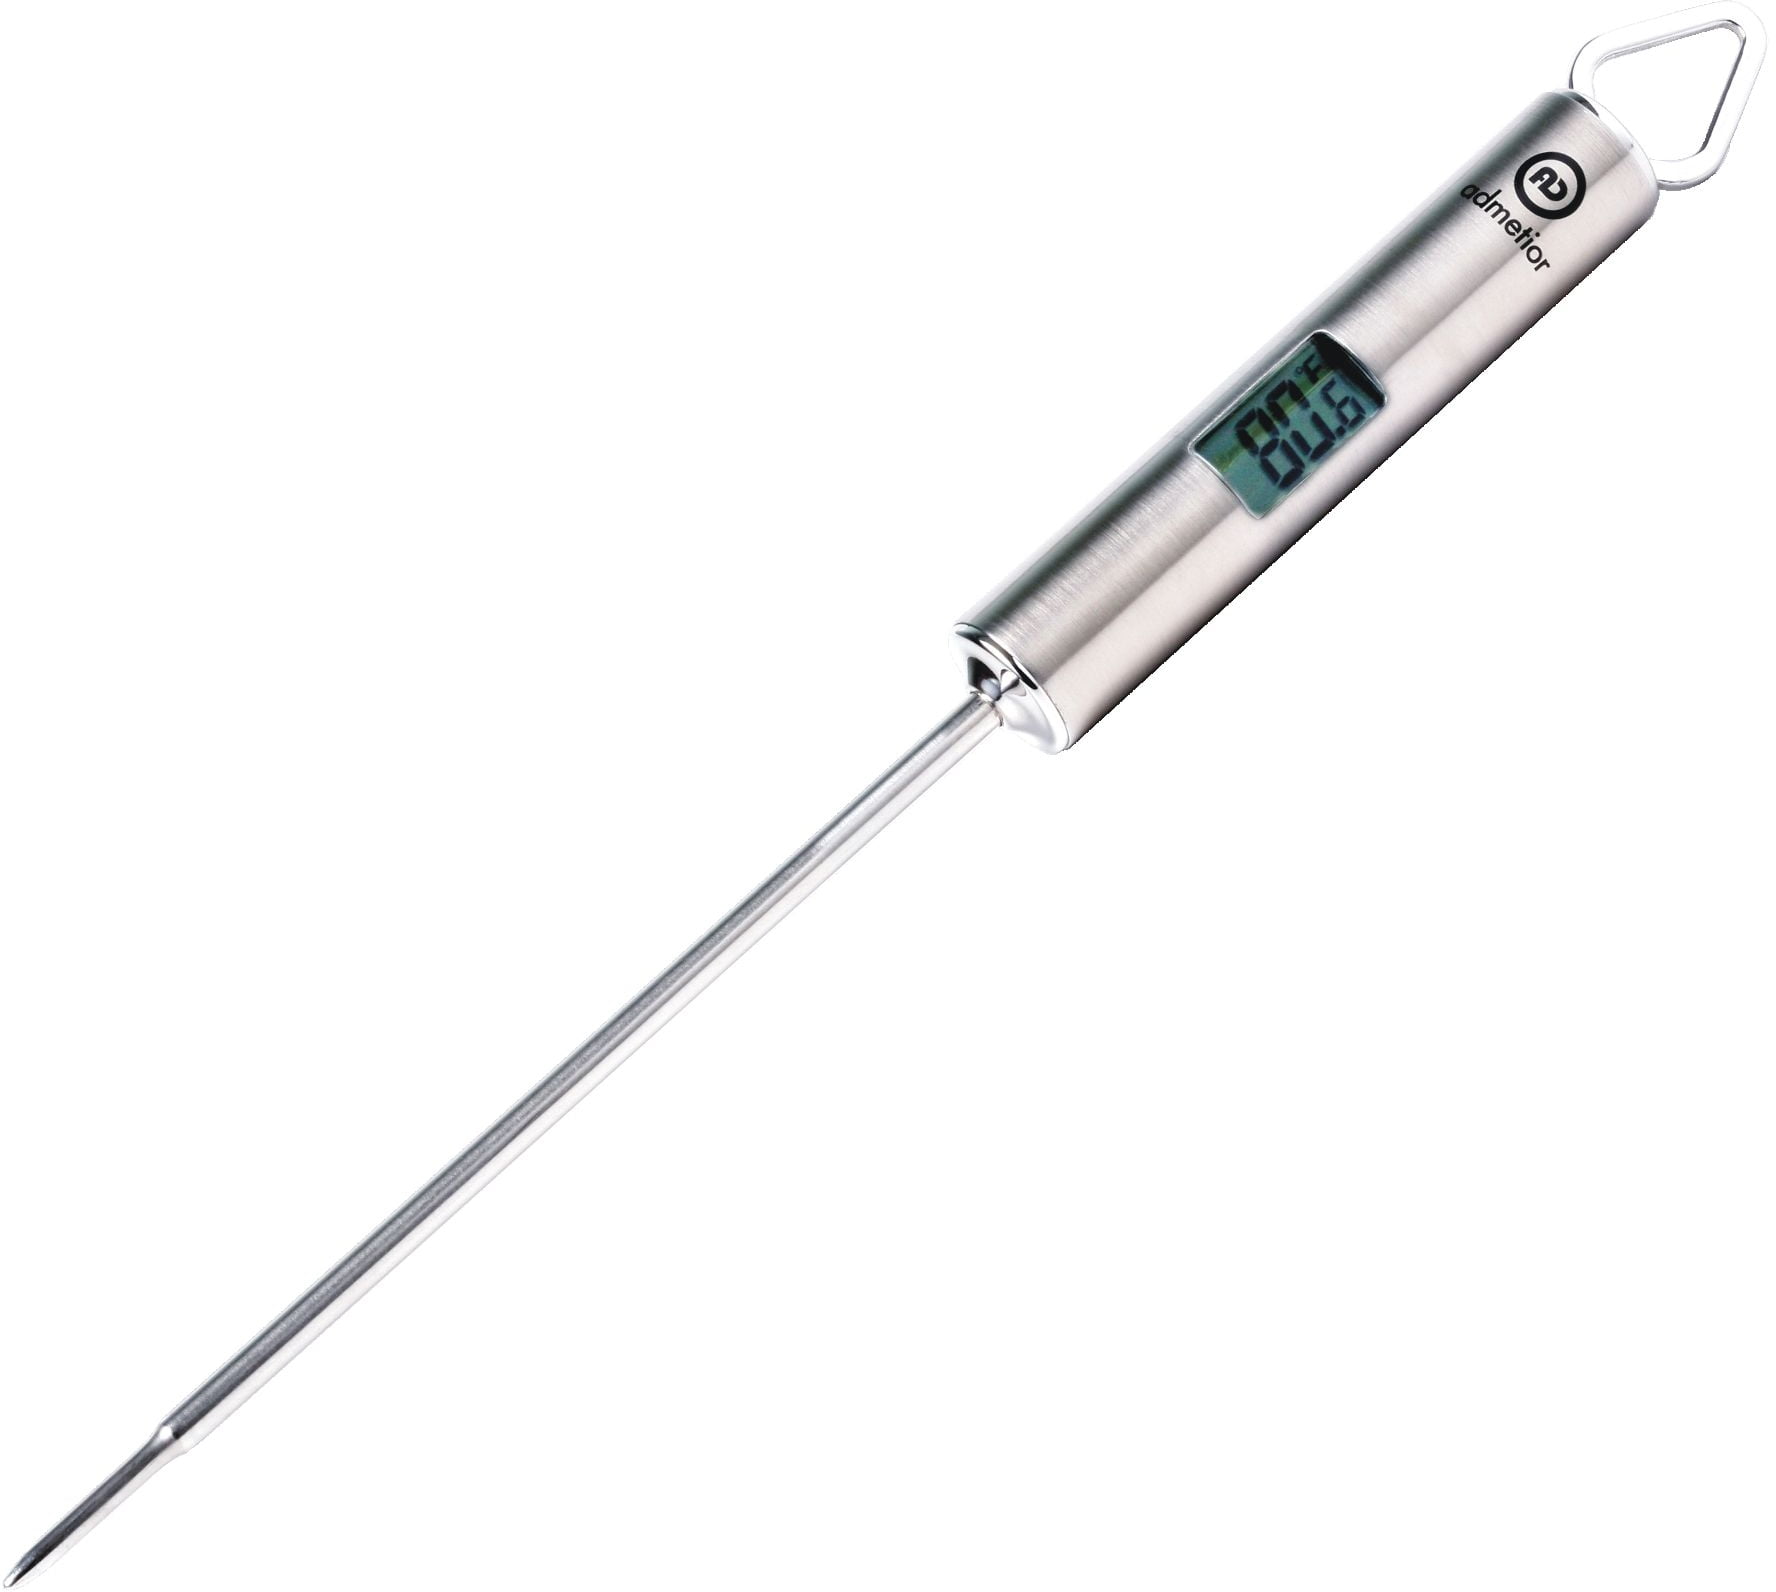 Admetior 6-Inch Candy/Deep Fry Thermometer 